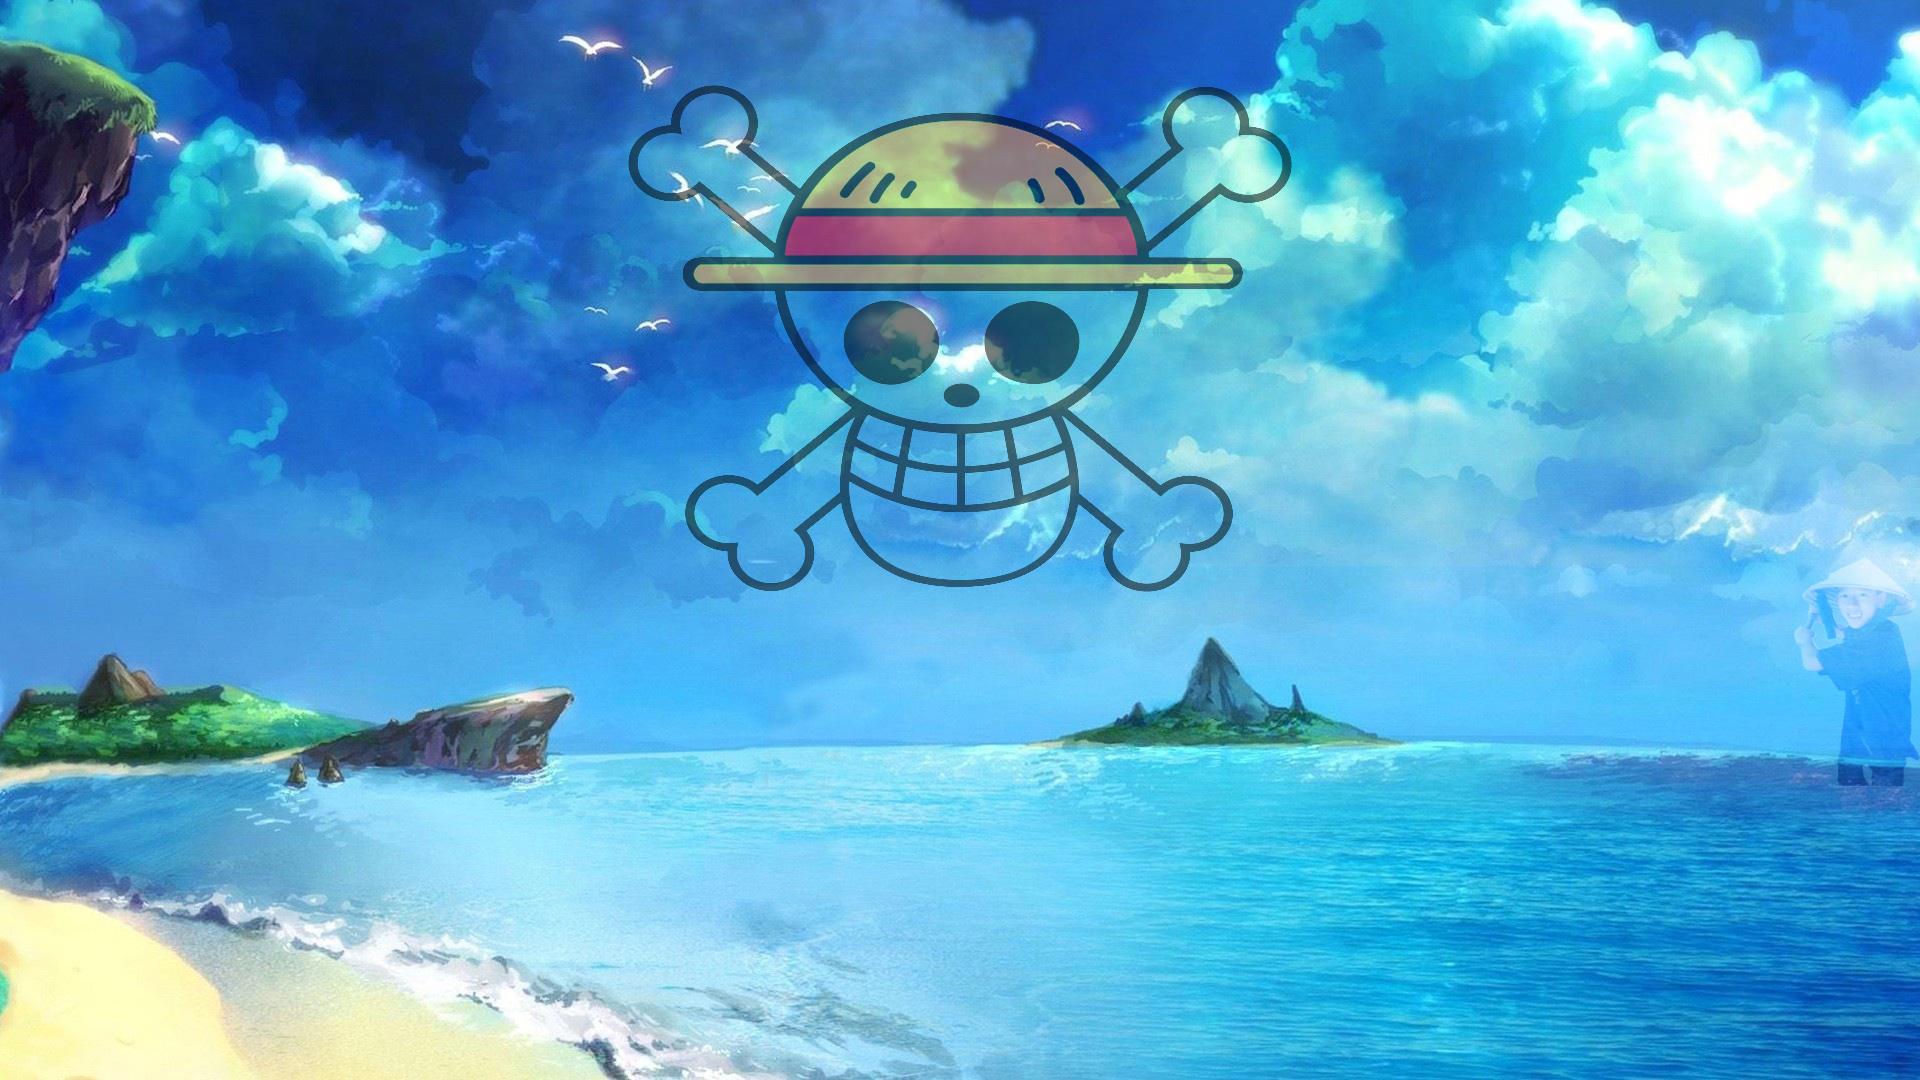 Wallpapers One Piece - Wallpaper Cave